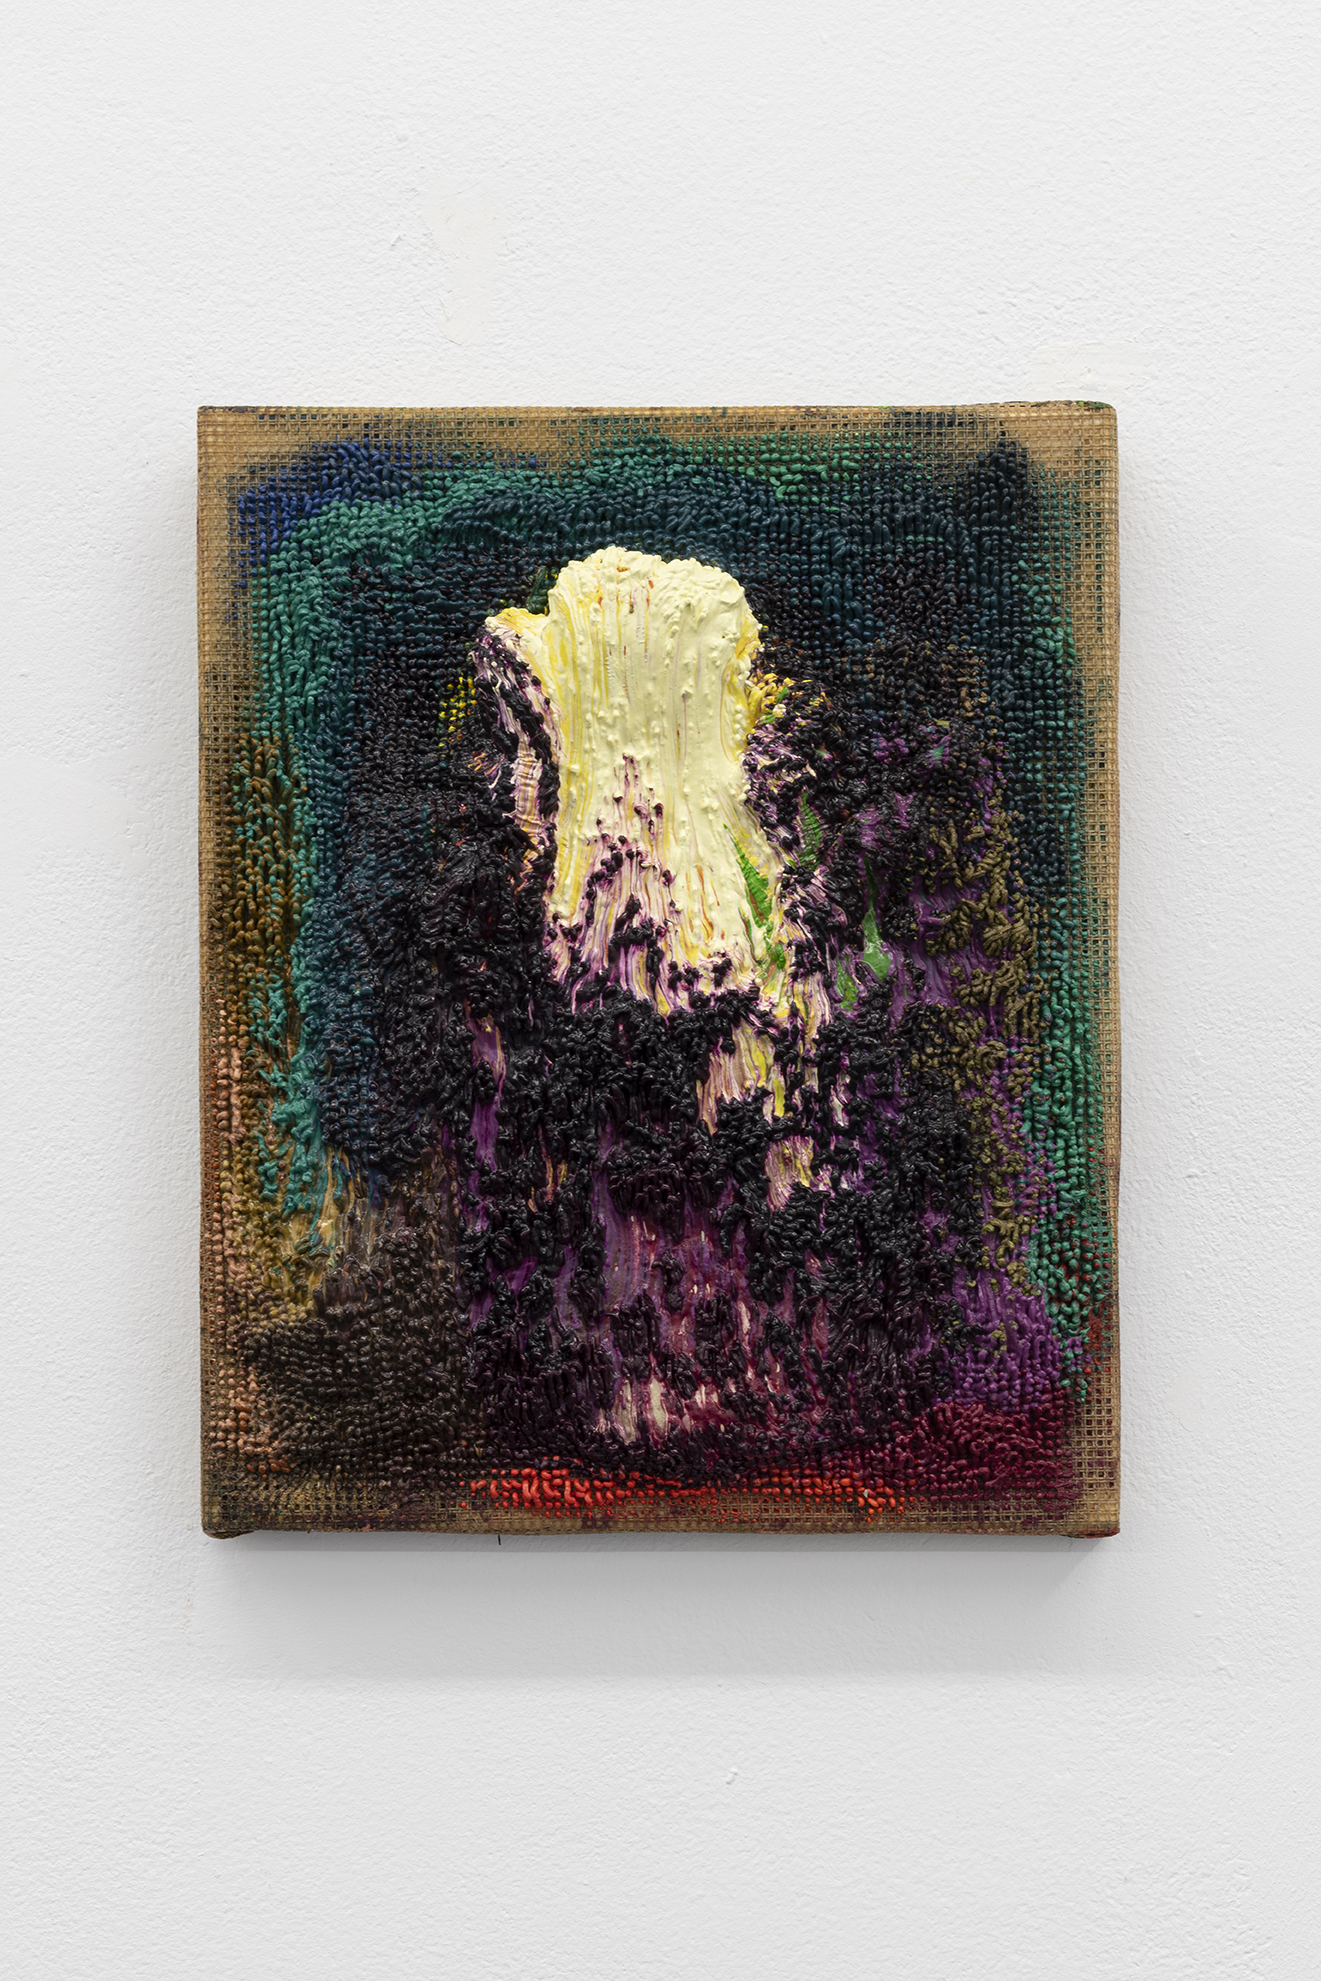 <p>Mesh (source), oil paint and marble dust in needlepoint mesh, 25 x 20 cm</p>
